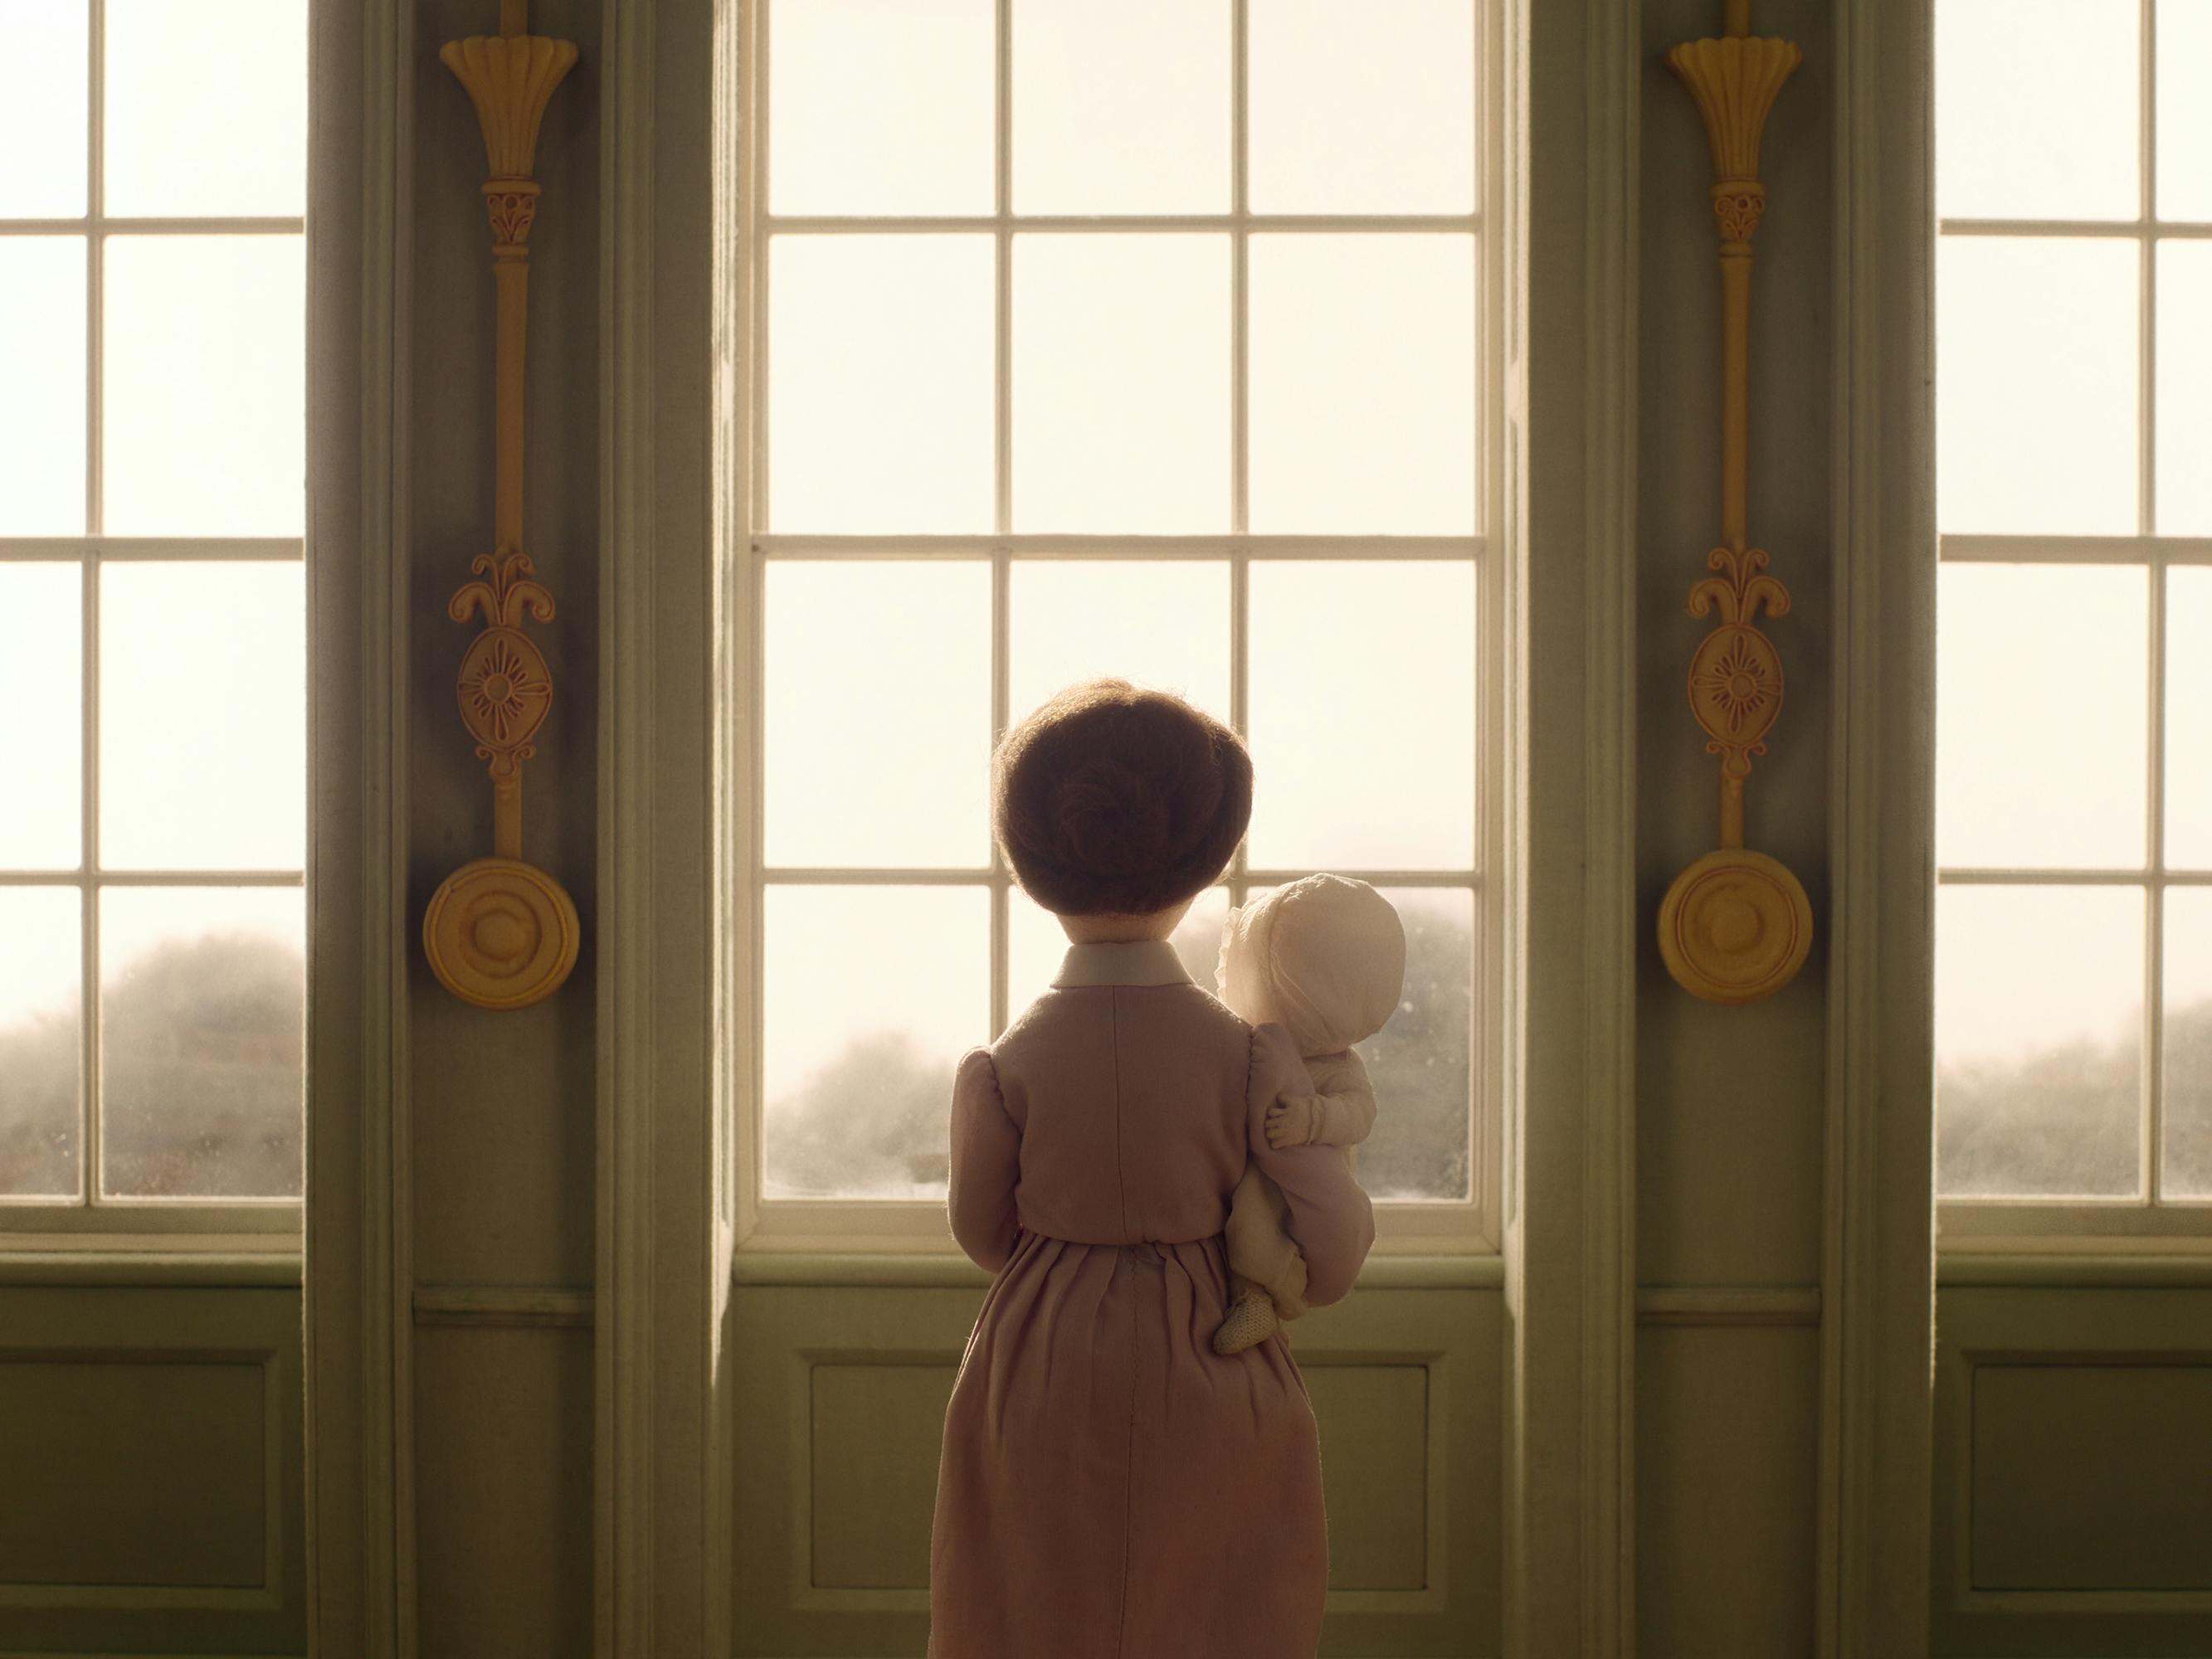 A felt woman holds a felt baby and looks out through a triptych window.